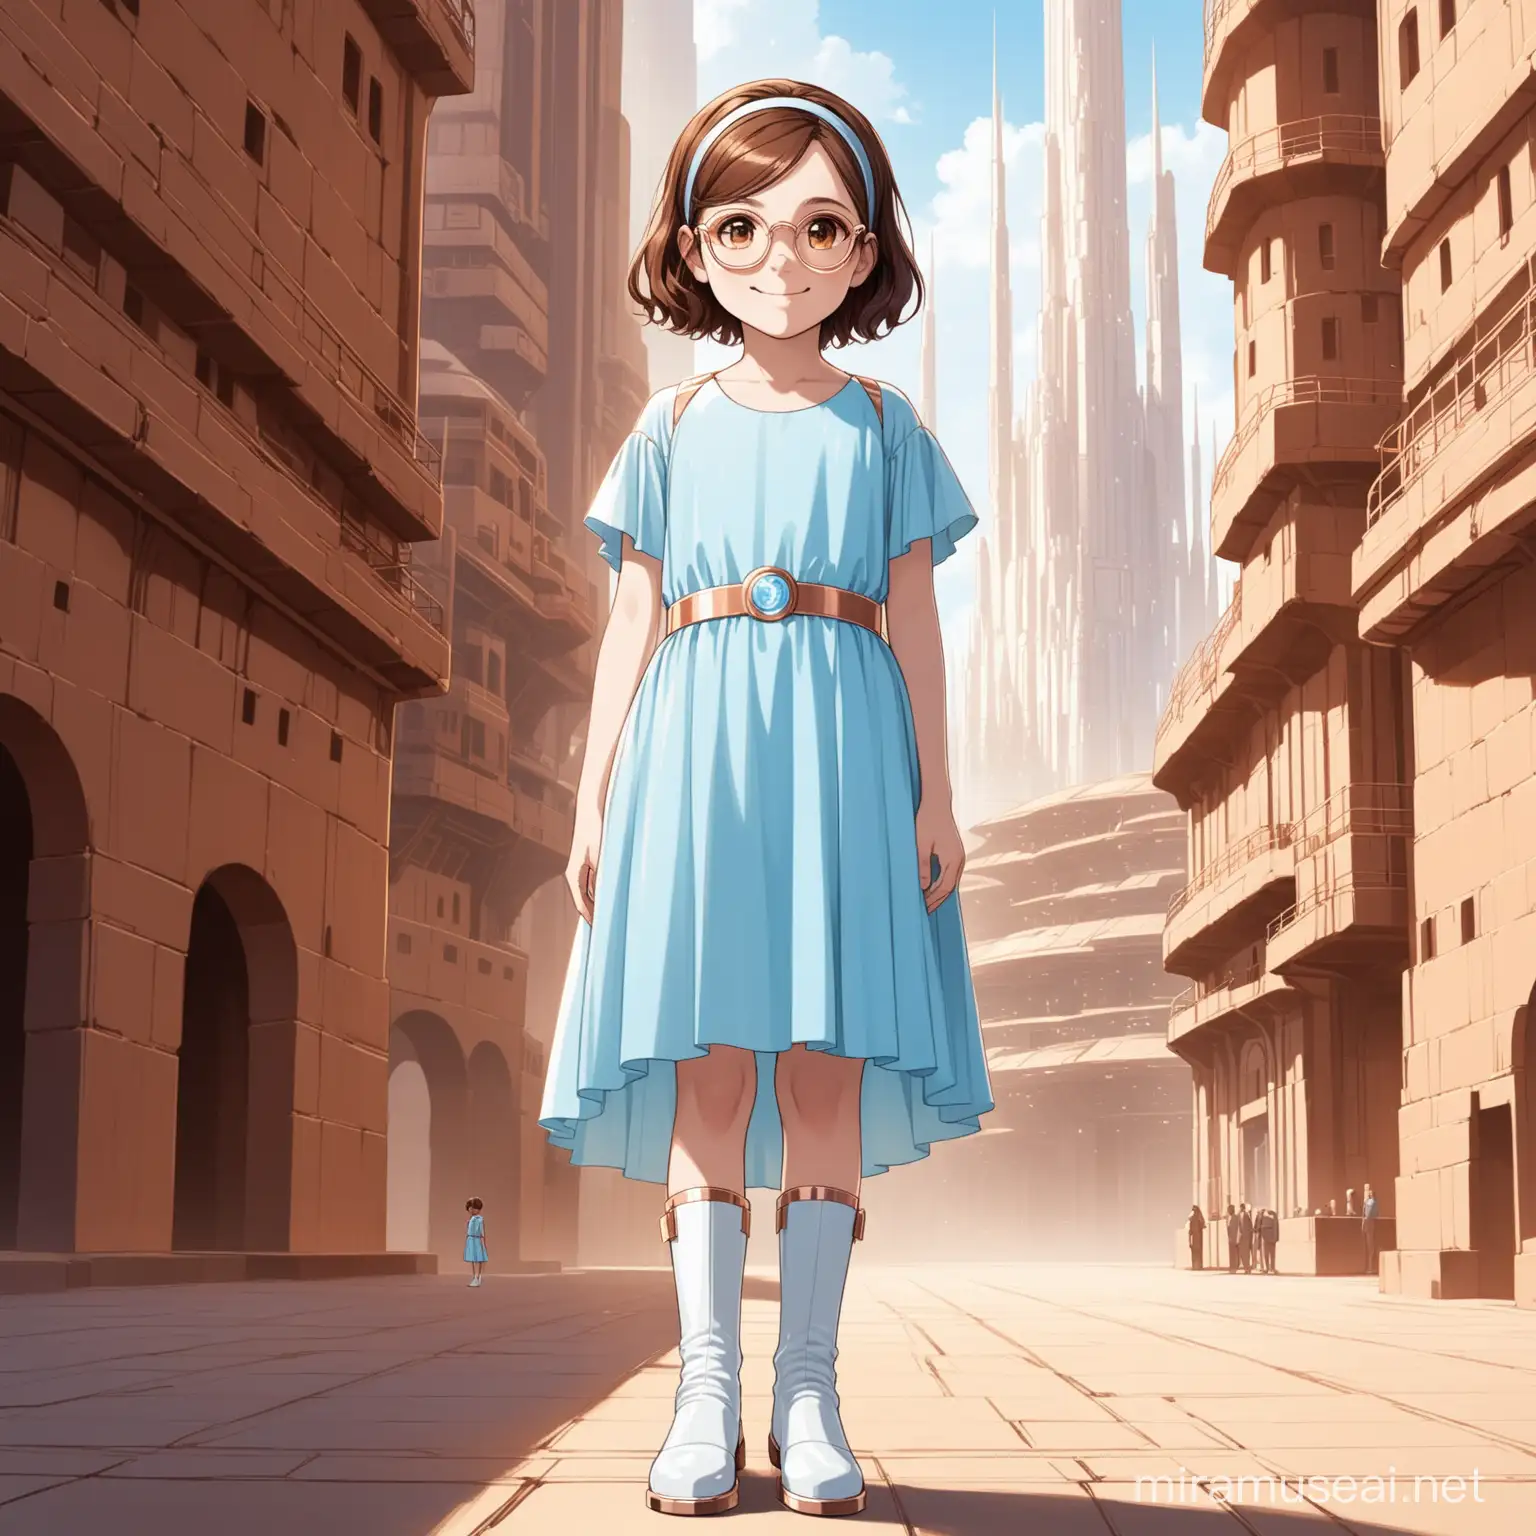 12 year old girl, short brown hair, rose gold glasses, brown eyes, smiling, headband, wearing pale blue dress, white boots, standing in coruscant